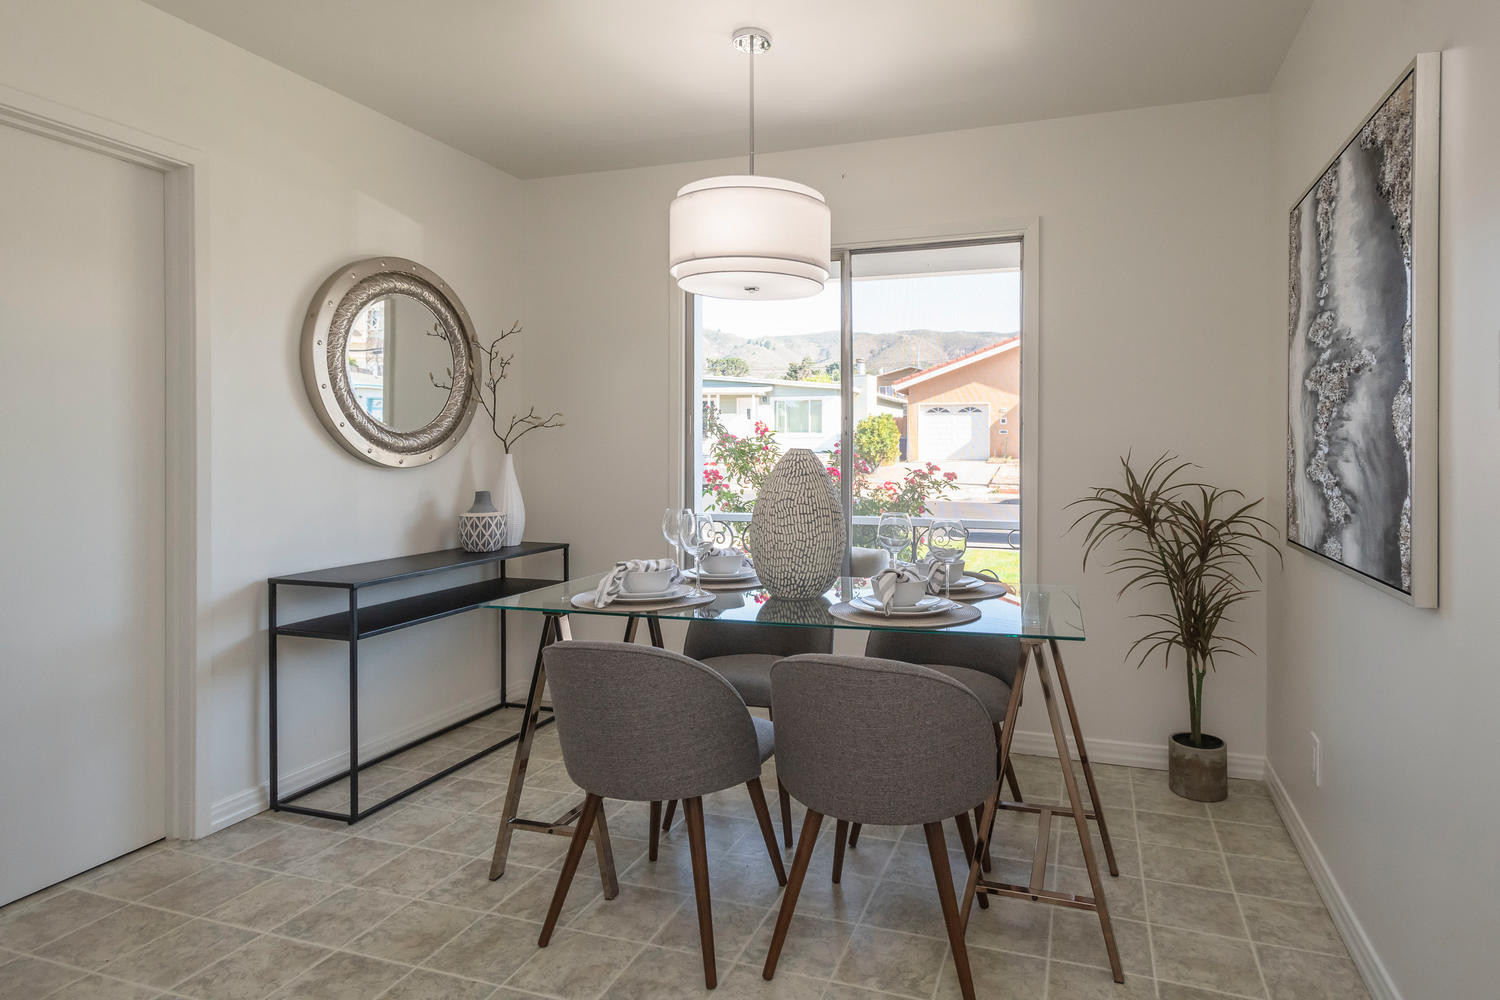 1285 Edgewood Way Dining Area Console Table in Sunshine Gardens Neighborhood in South San Francisco.